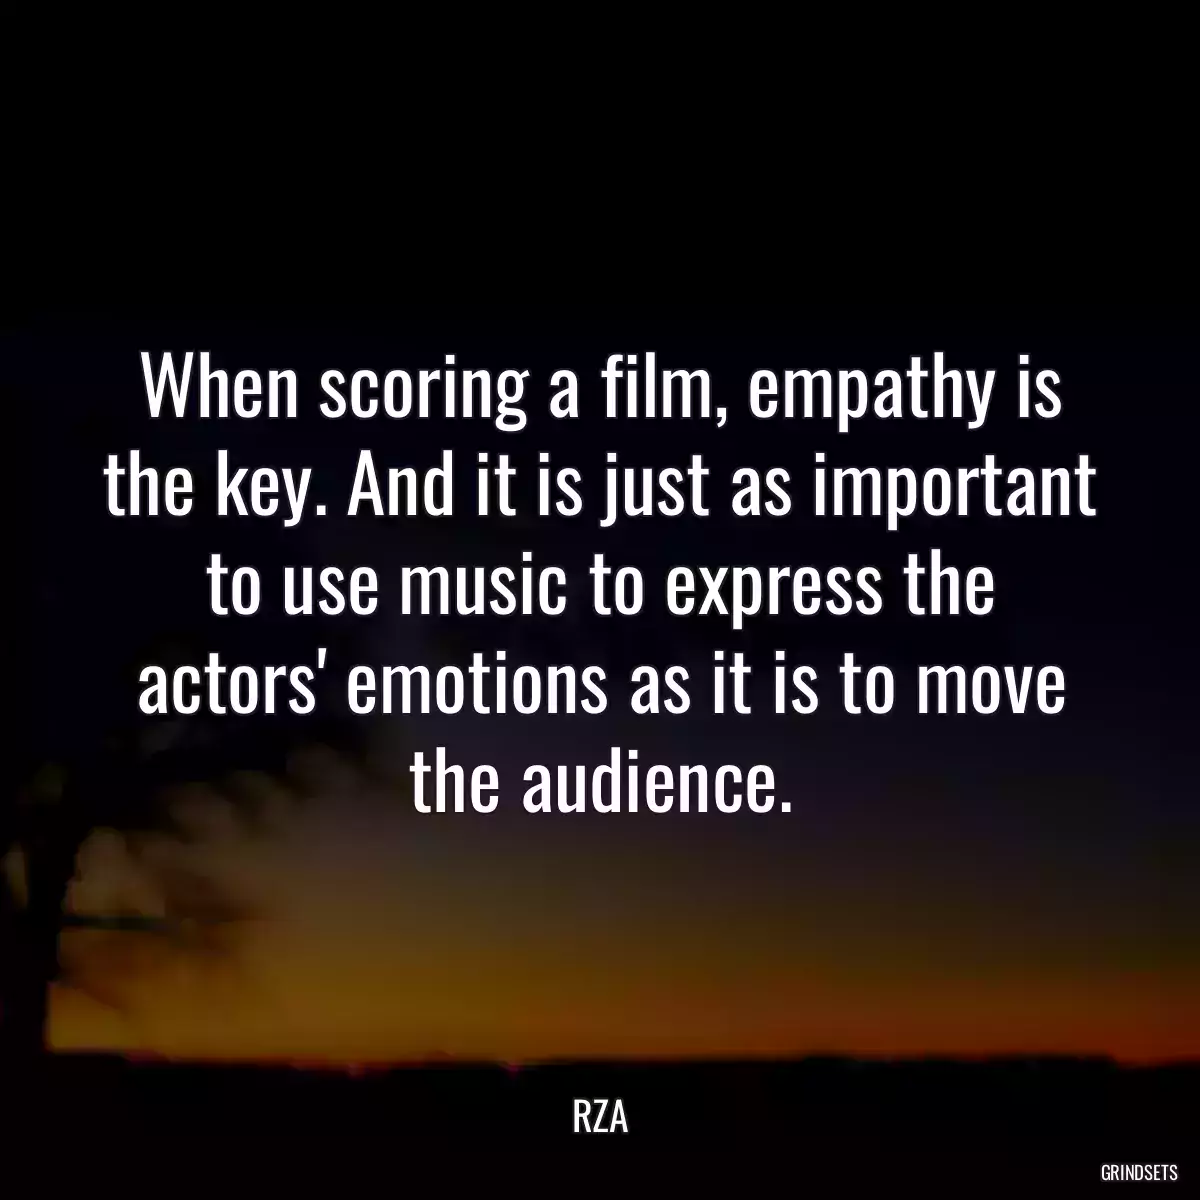 When scoring a film, empathy is the key. And it is just as important to use music to express the actors\' emotions as it is to move the audience.